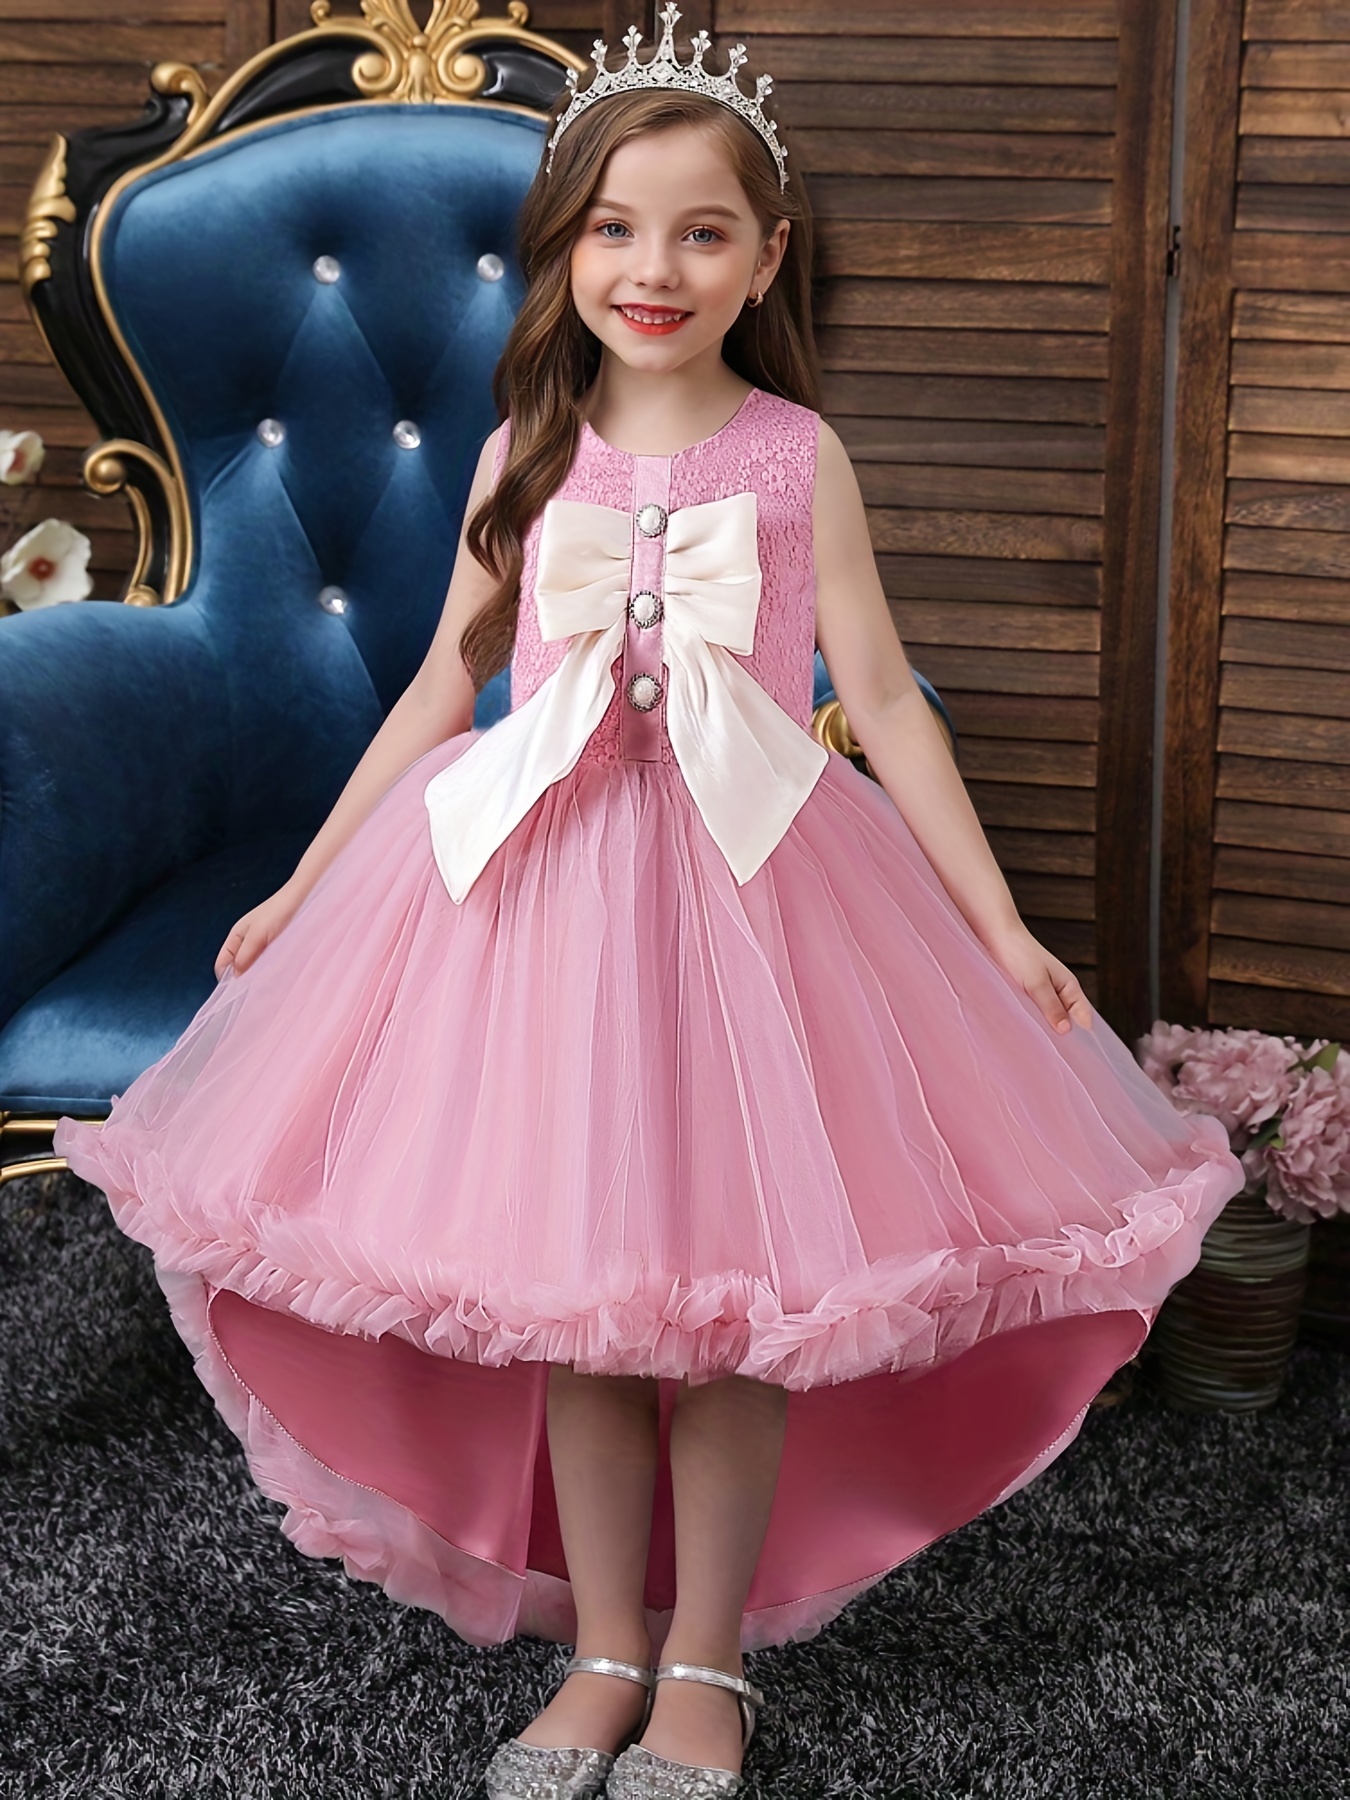 Flower Girl Dress for Weddings Fashion White Gauze Piano Performance  Dresses Kids Girls A-line Birthday Party Ball Gowns